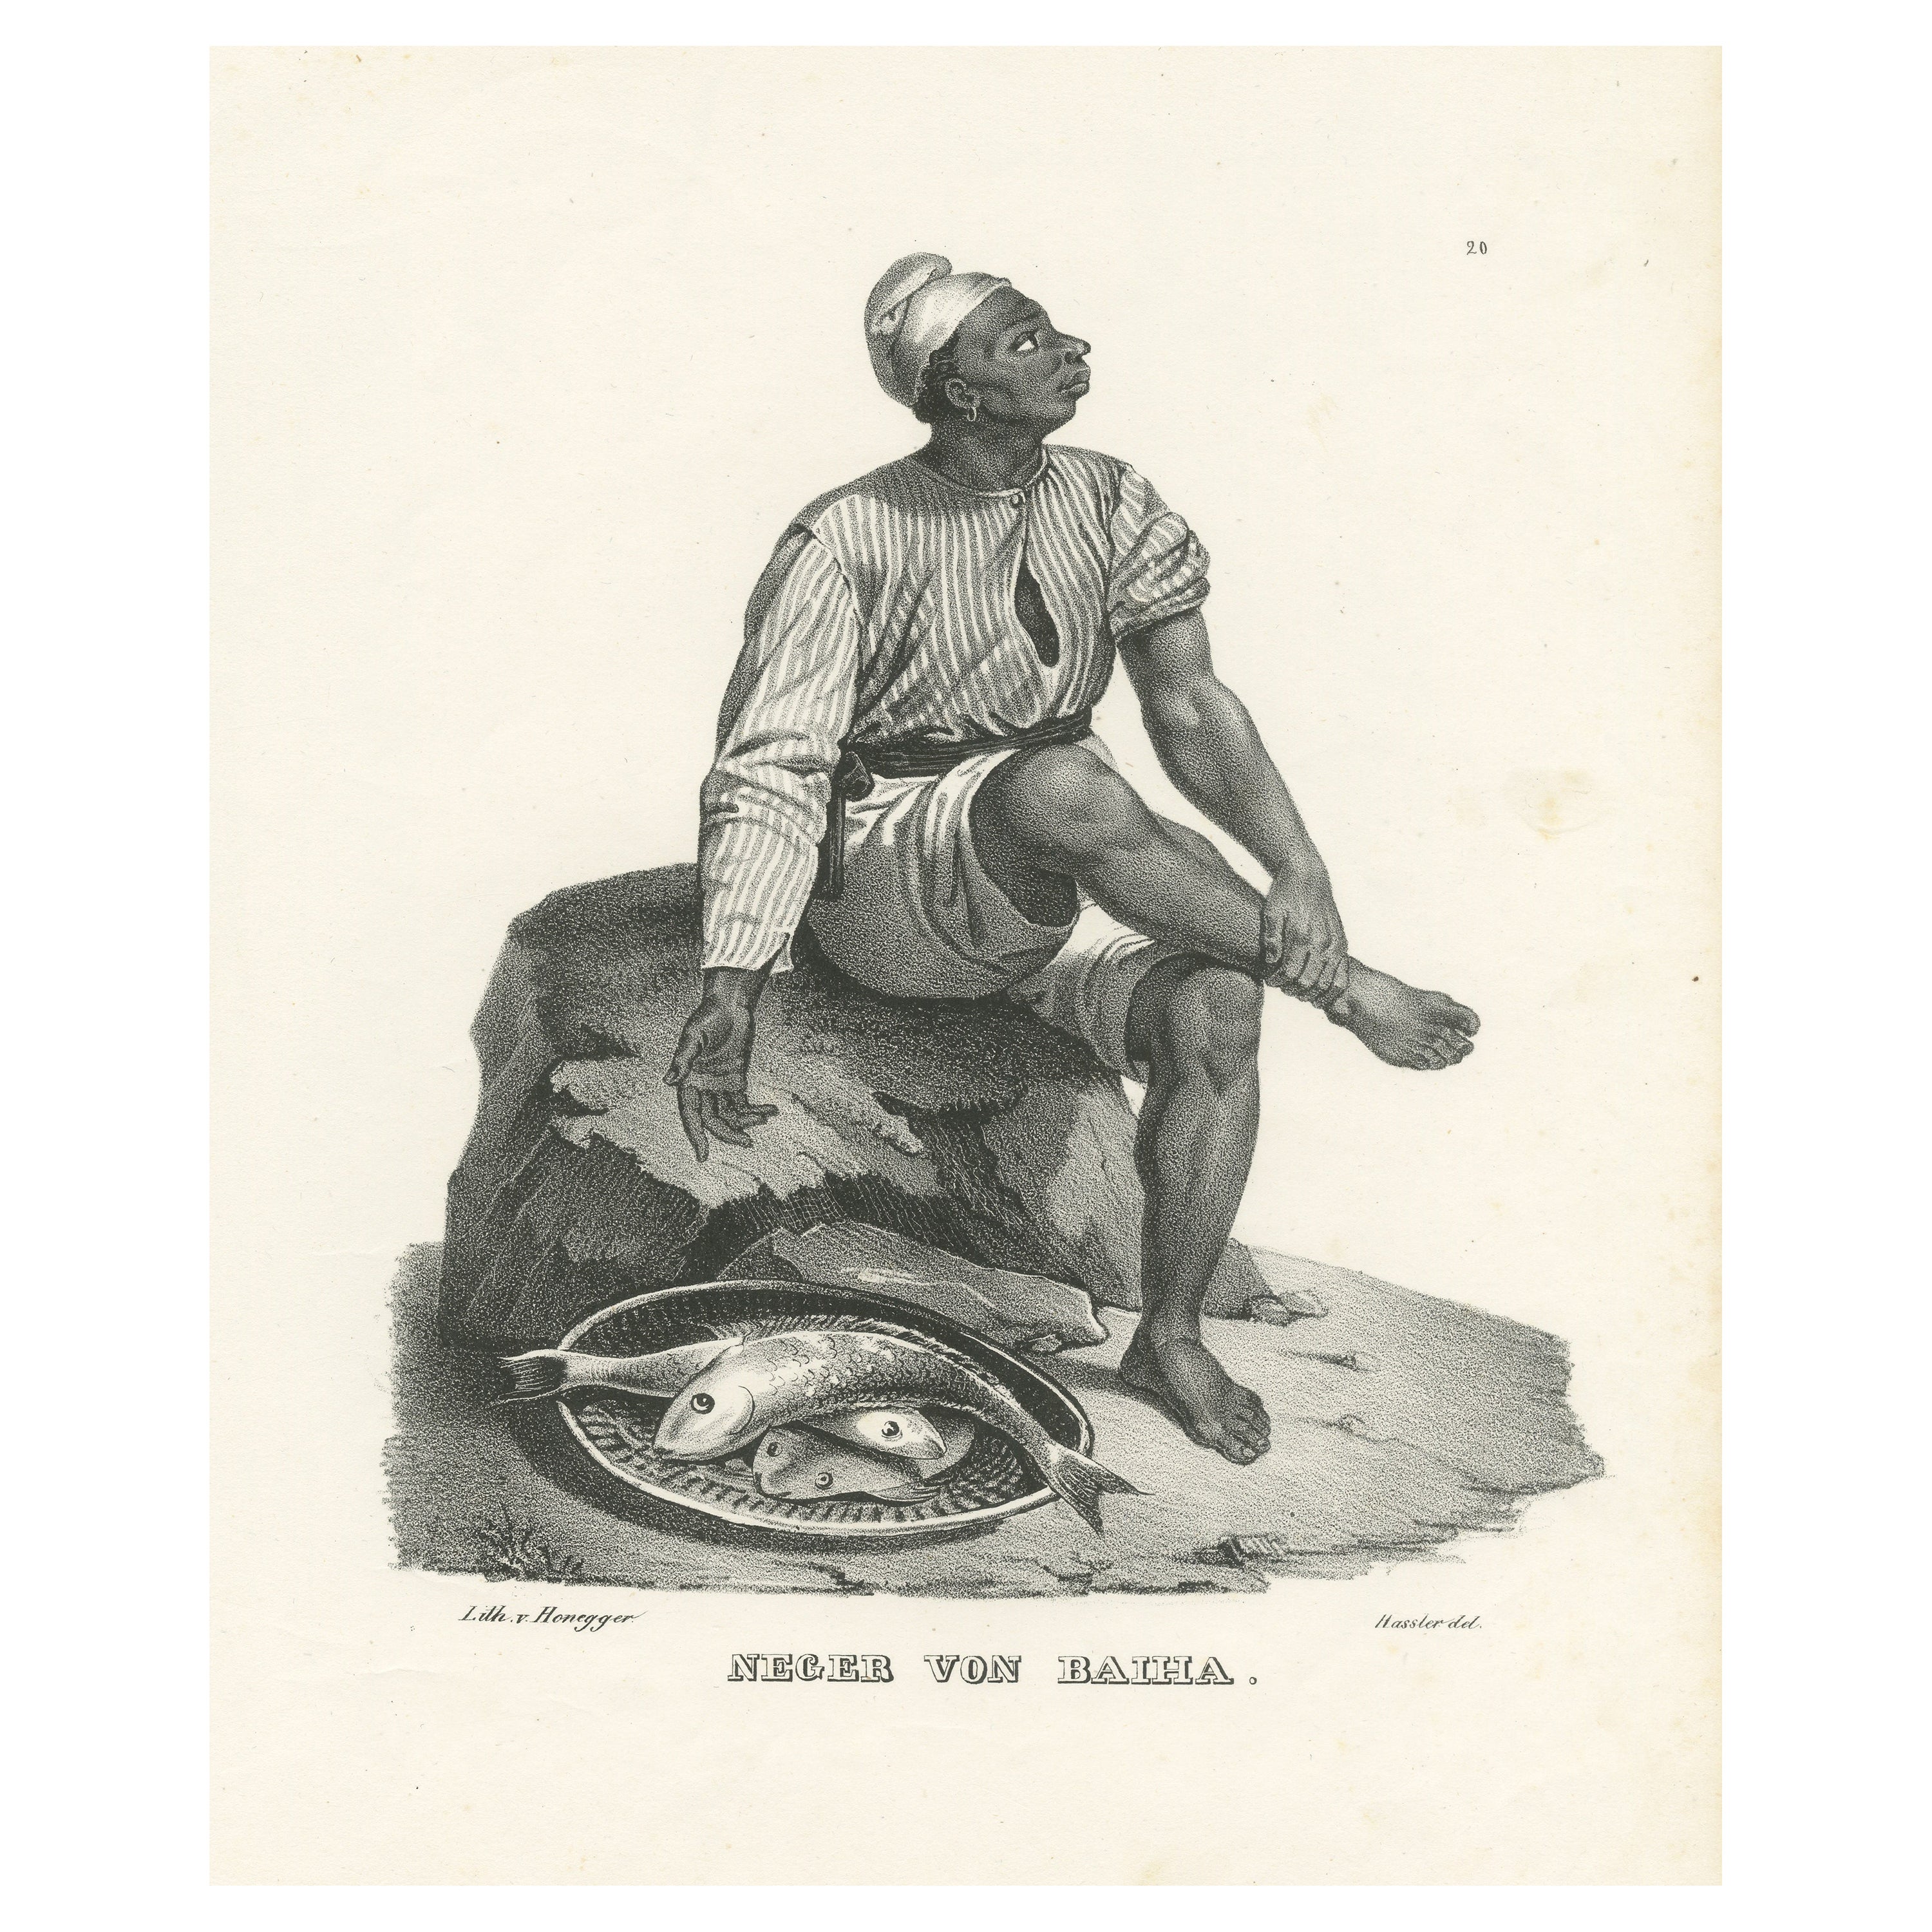 Antique Steel Engraved Print showing a Native of Bahia, Brazil For Sale